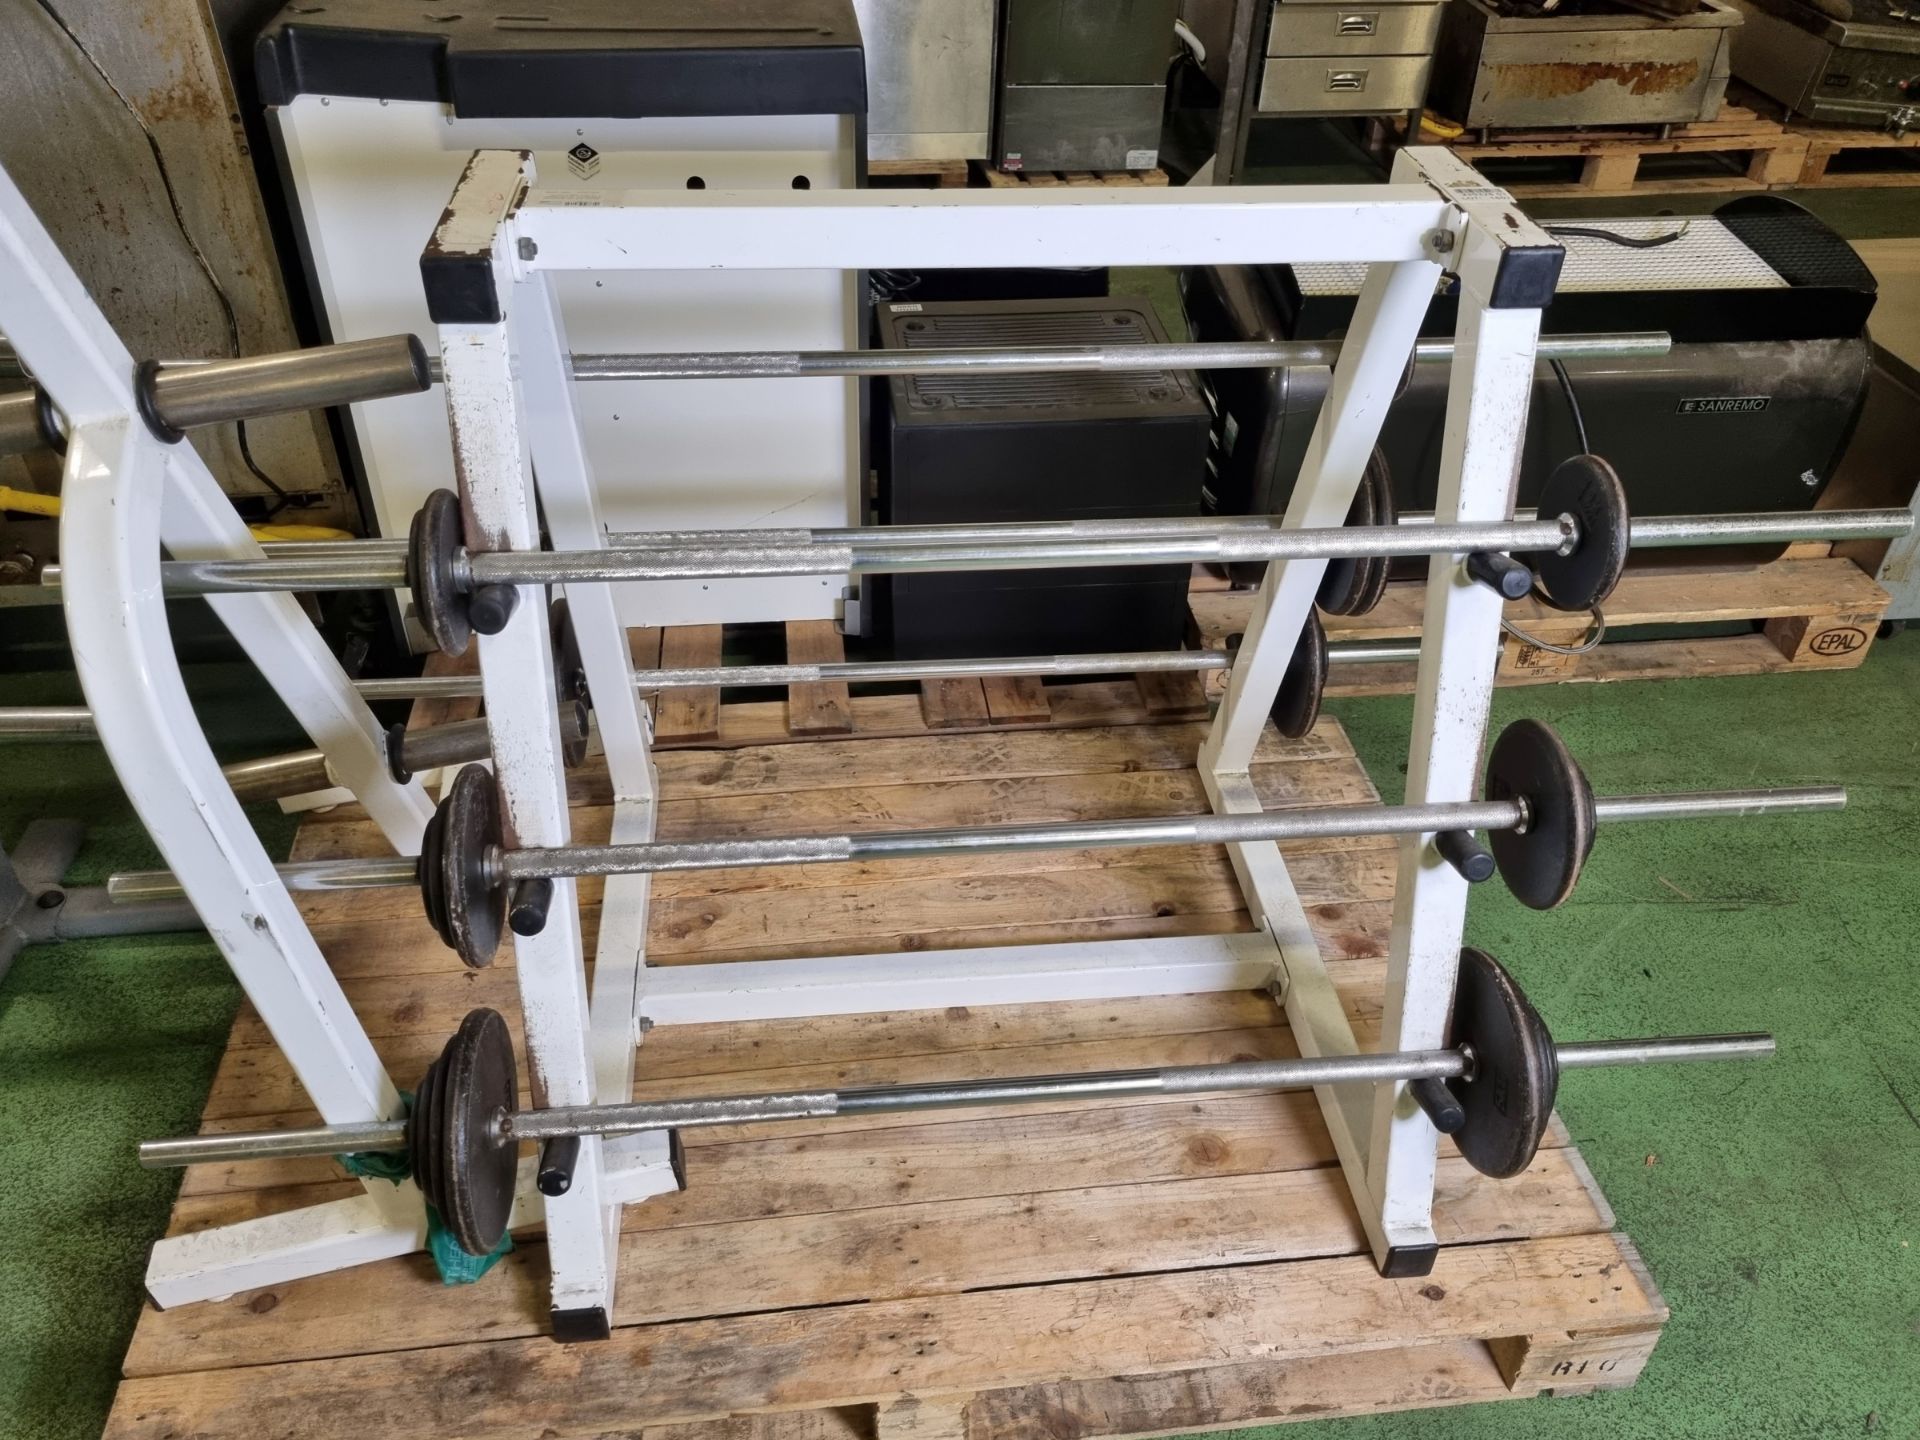 Metal weight rack - L50 x W79 x H126cm, Barbell rack with assortment of barbells in various weights - Image 3 of 4